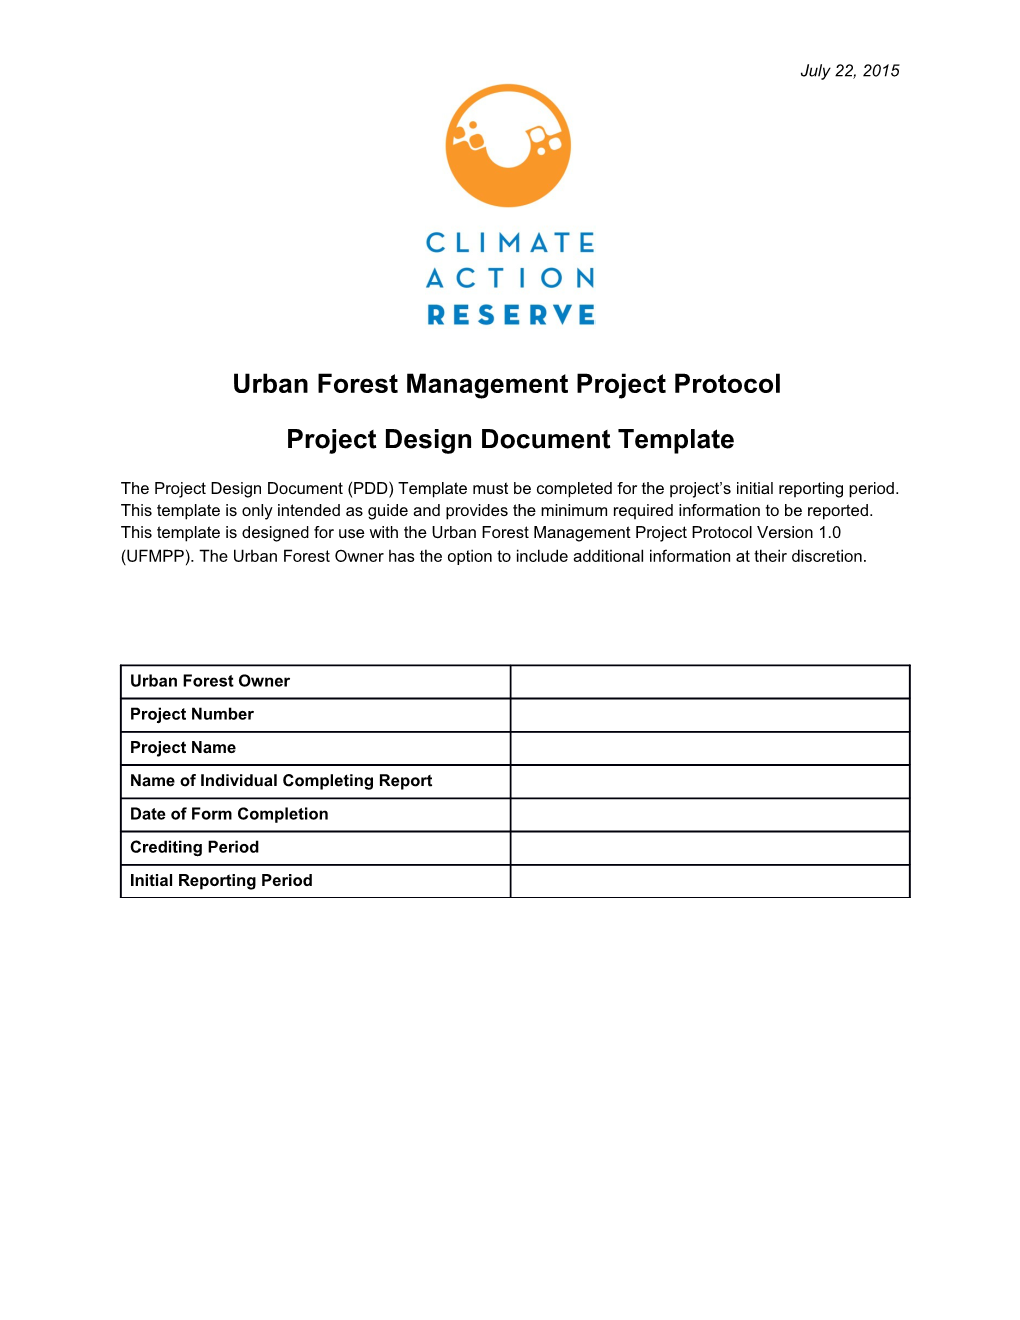 Urban Forest Management Project Protocol